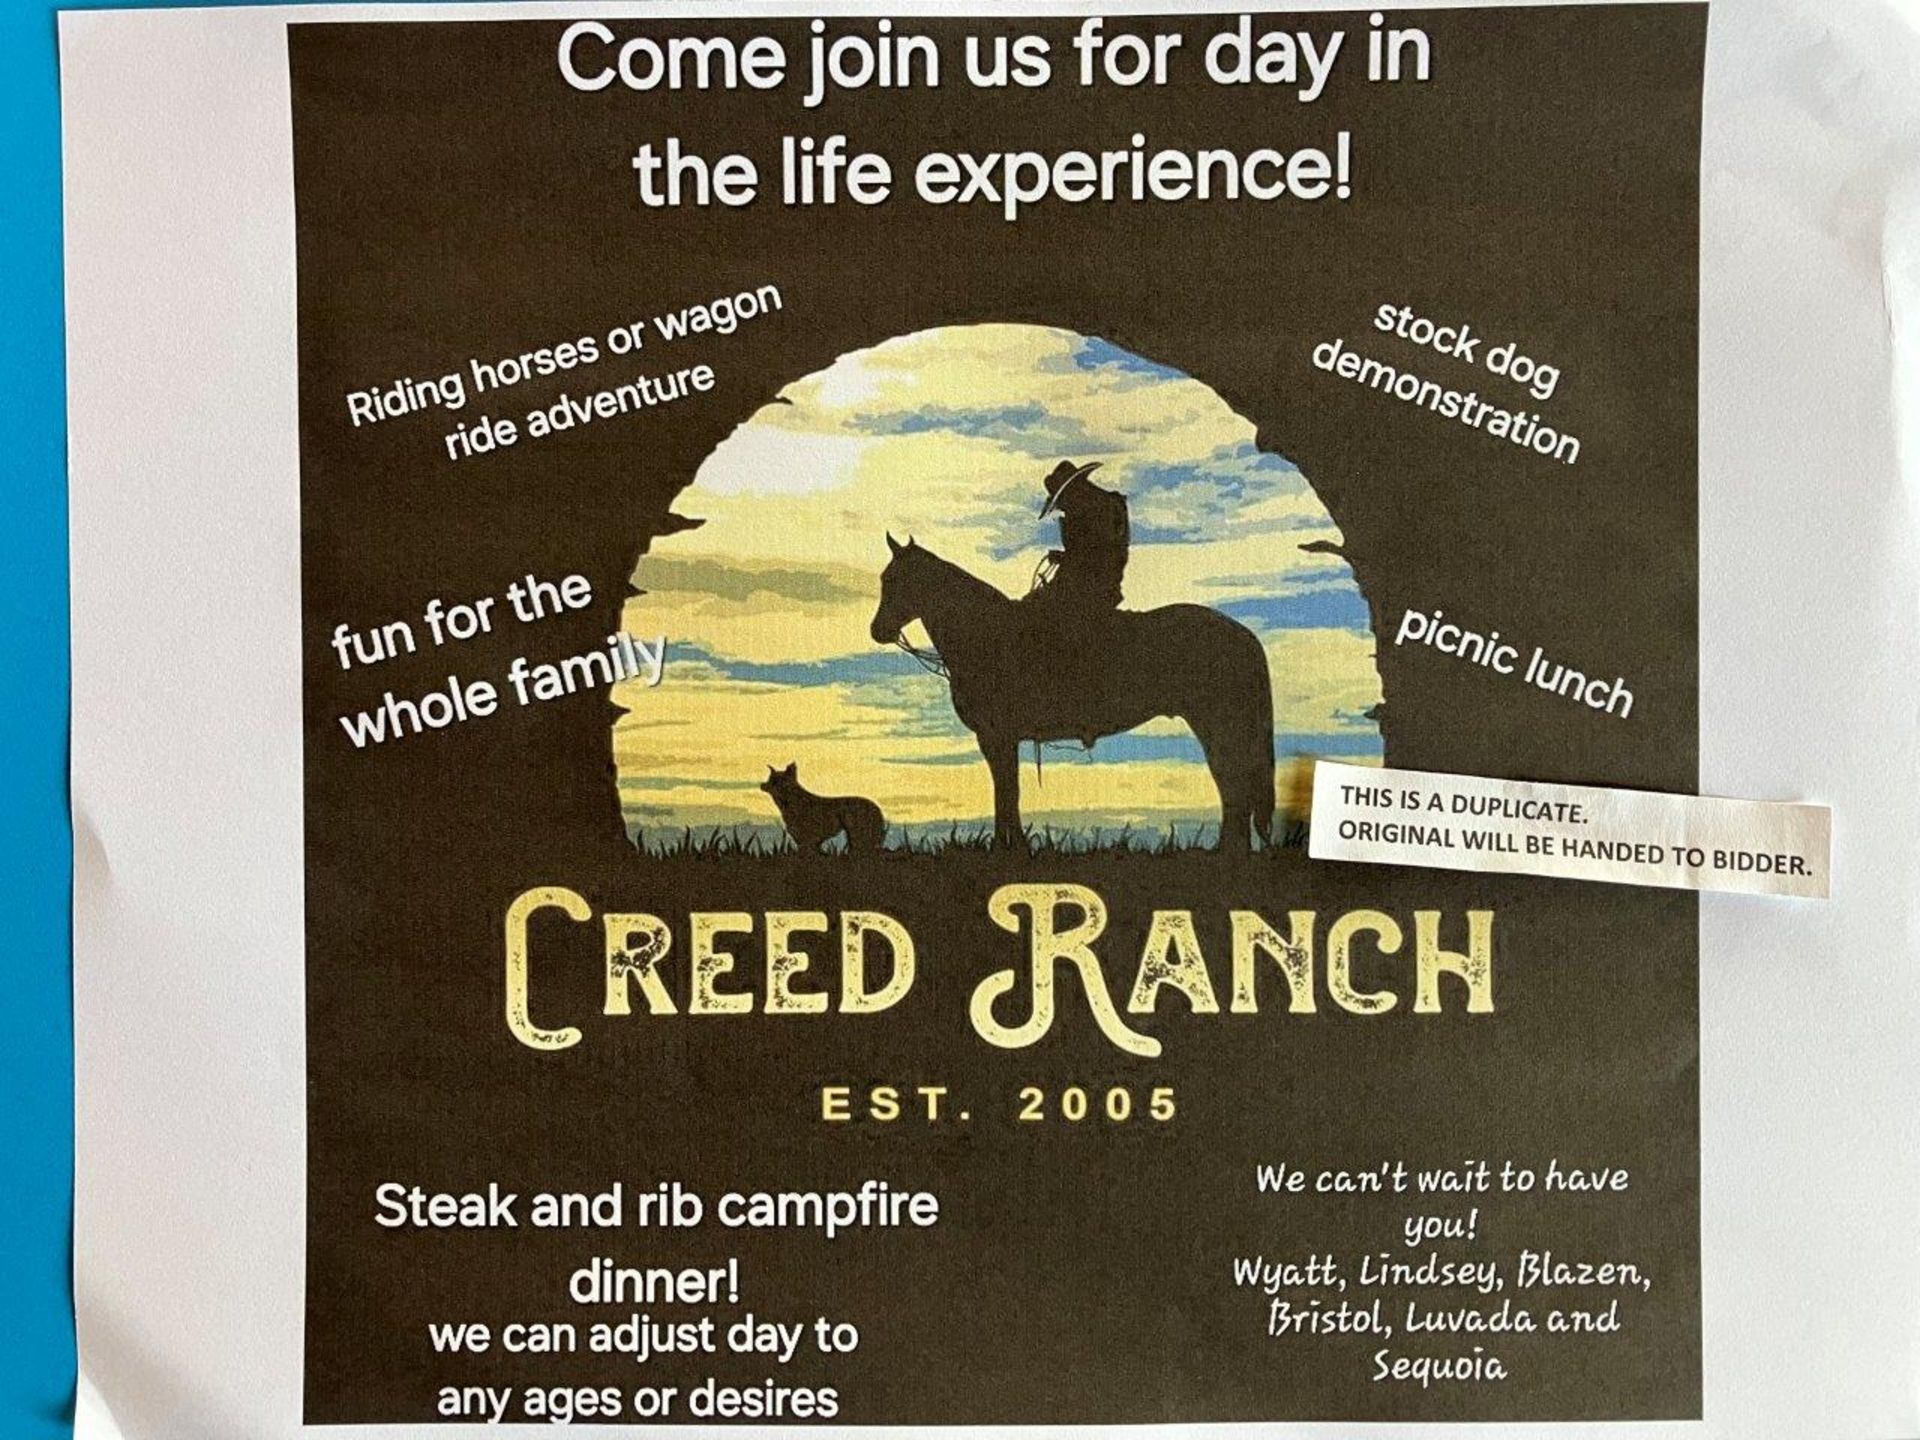 CREED RANCH GIFT CERTIFICATE FOR "A DAY IN THE LIFE" - Image 2 of 2